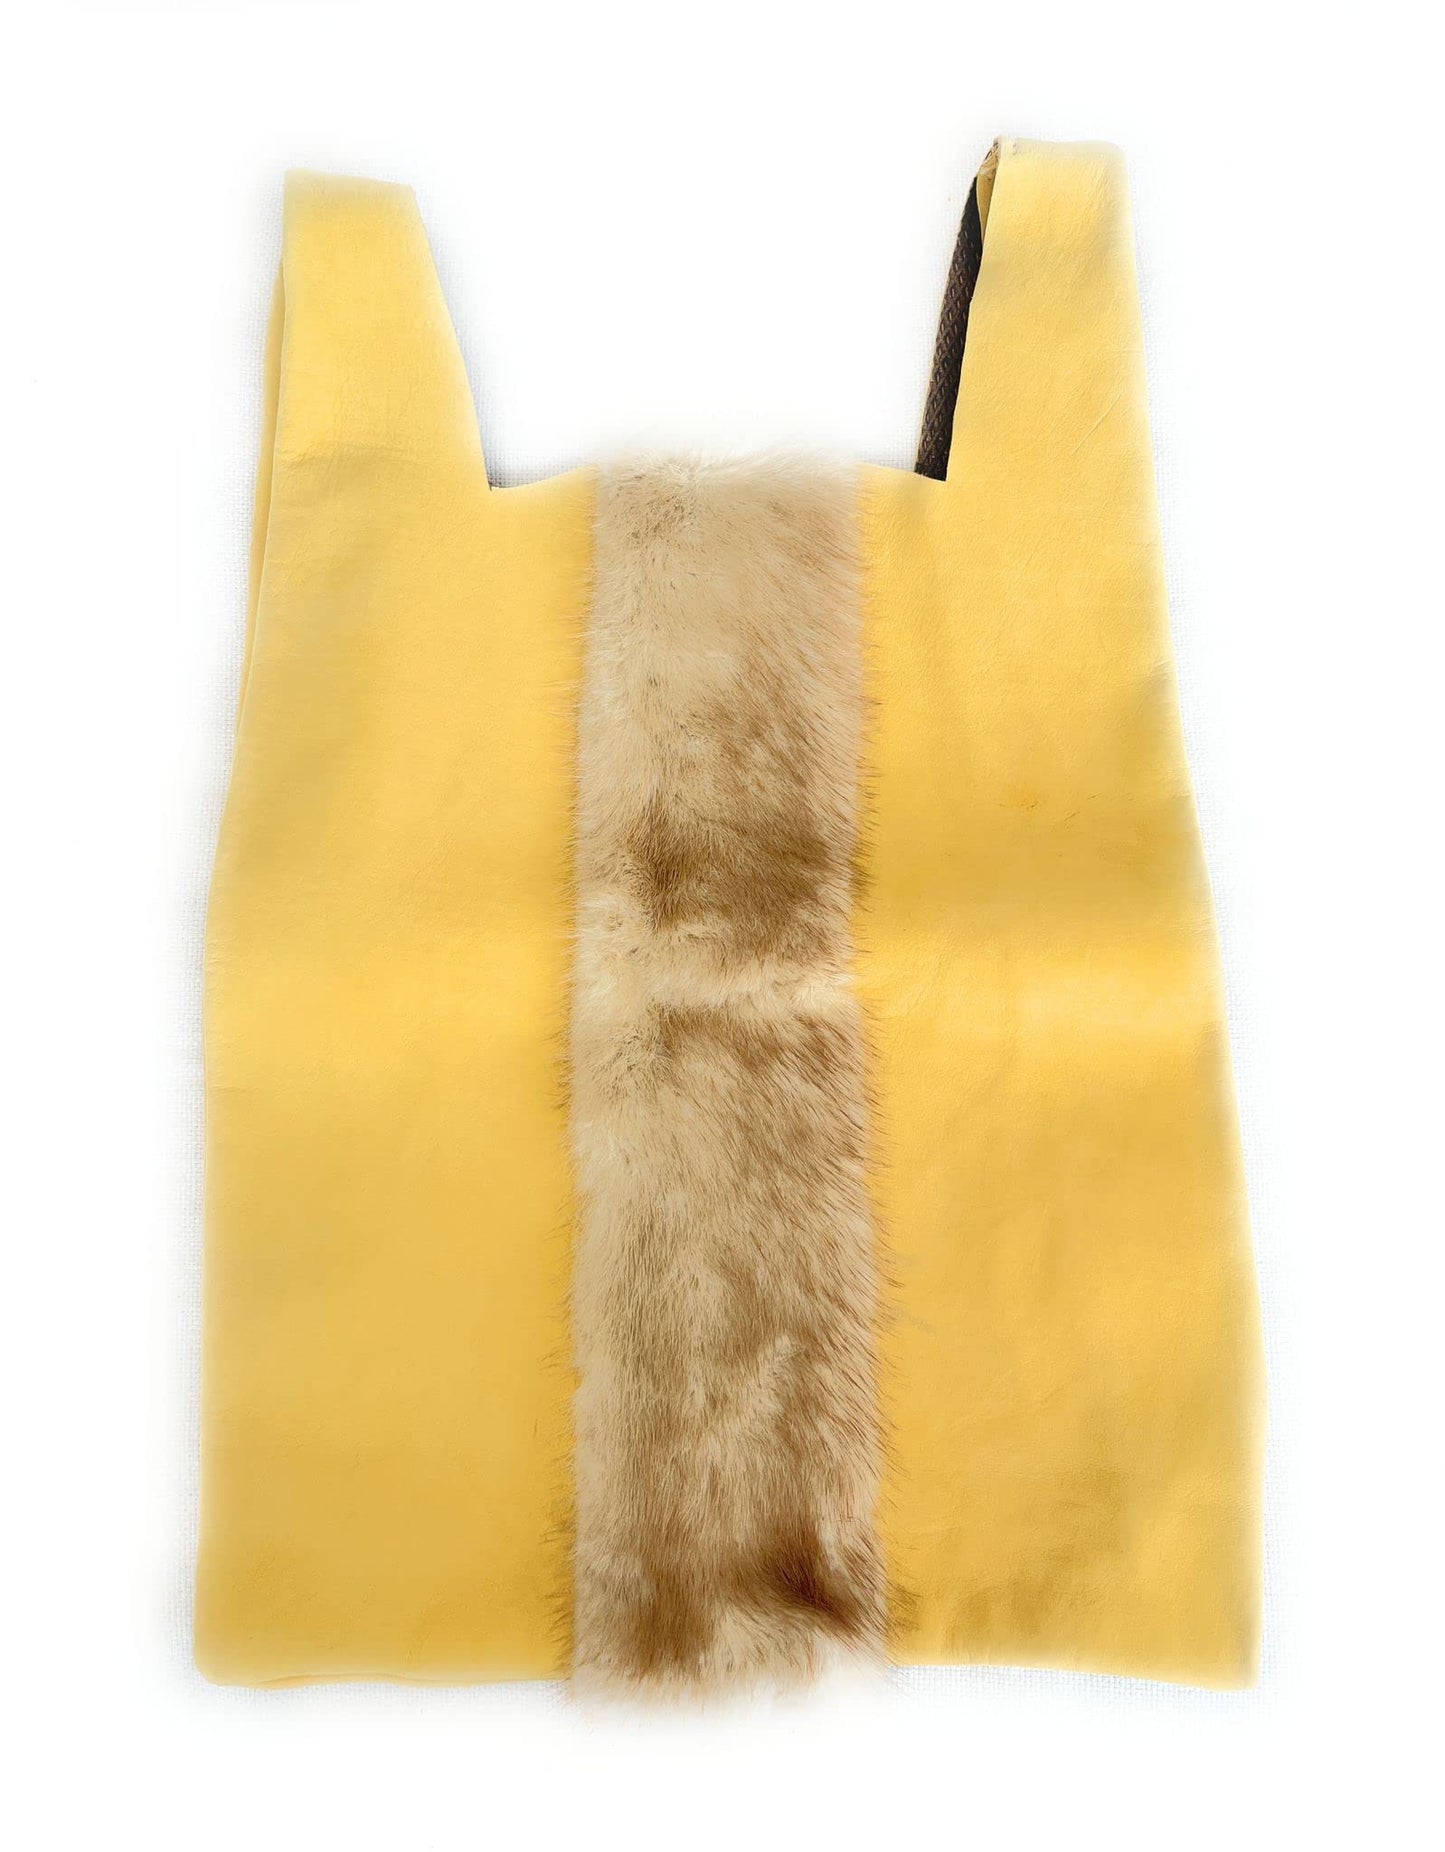 Marika De Paola - Shopping Bag in leather and mink fur, handmade in Italy, luxury craftsmanship